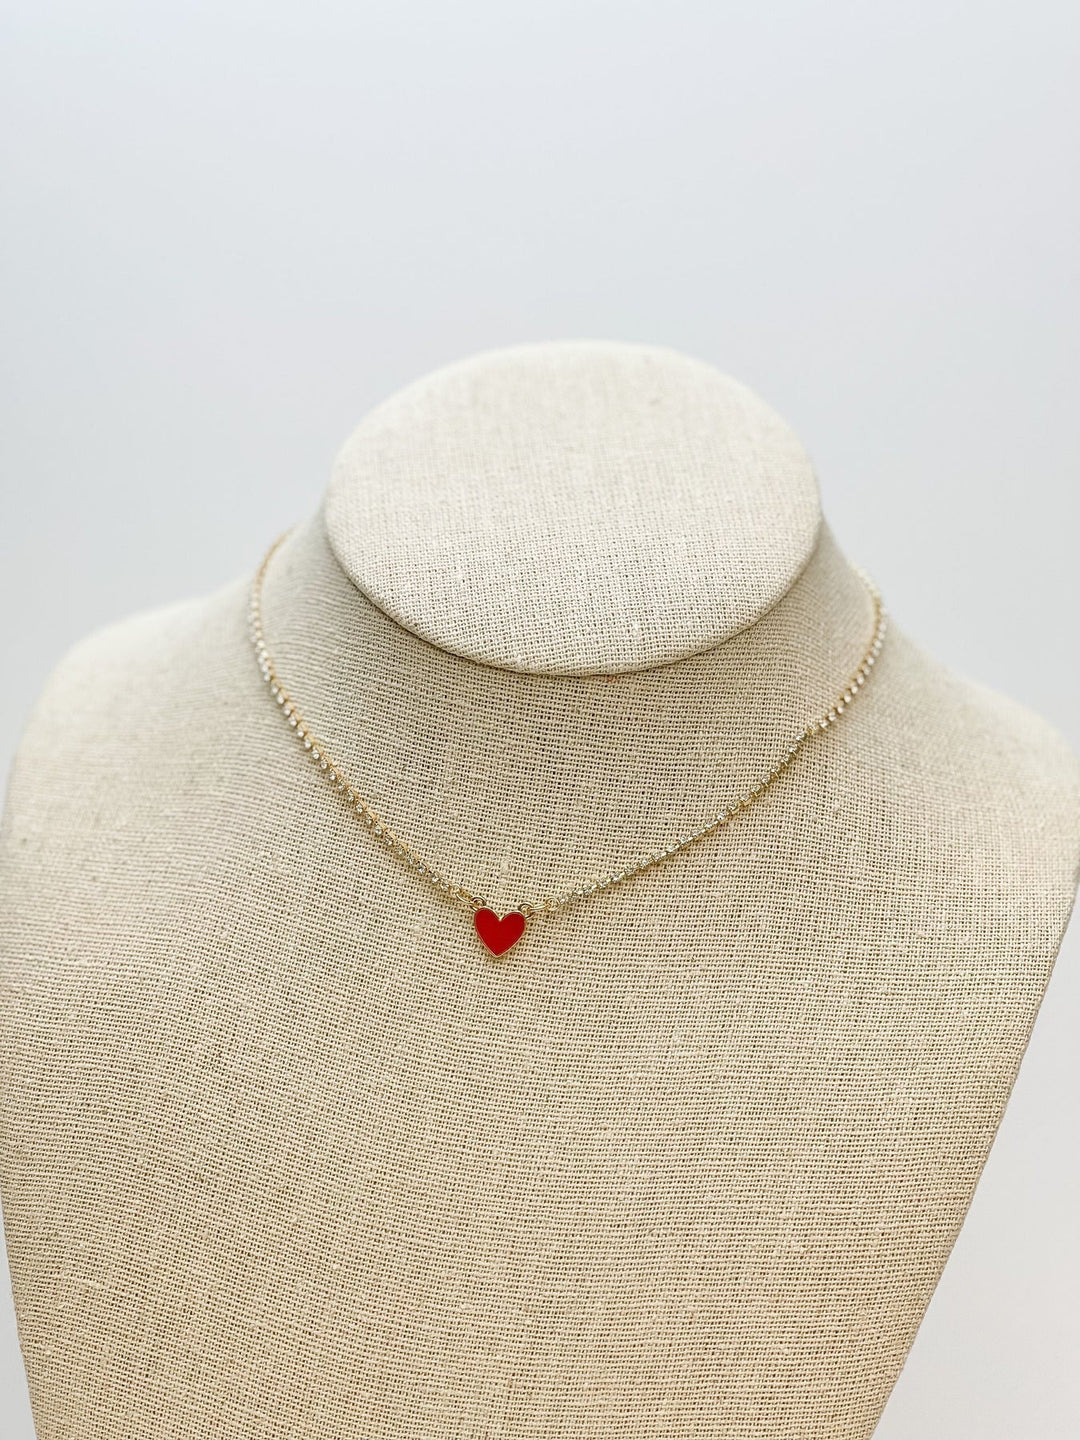 Womens - PREORDER: Glitzy Chain Heart Necklaces In Assorted Colors